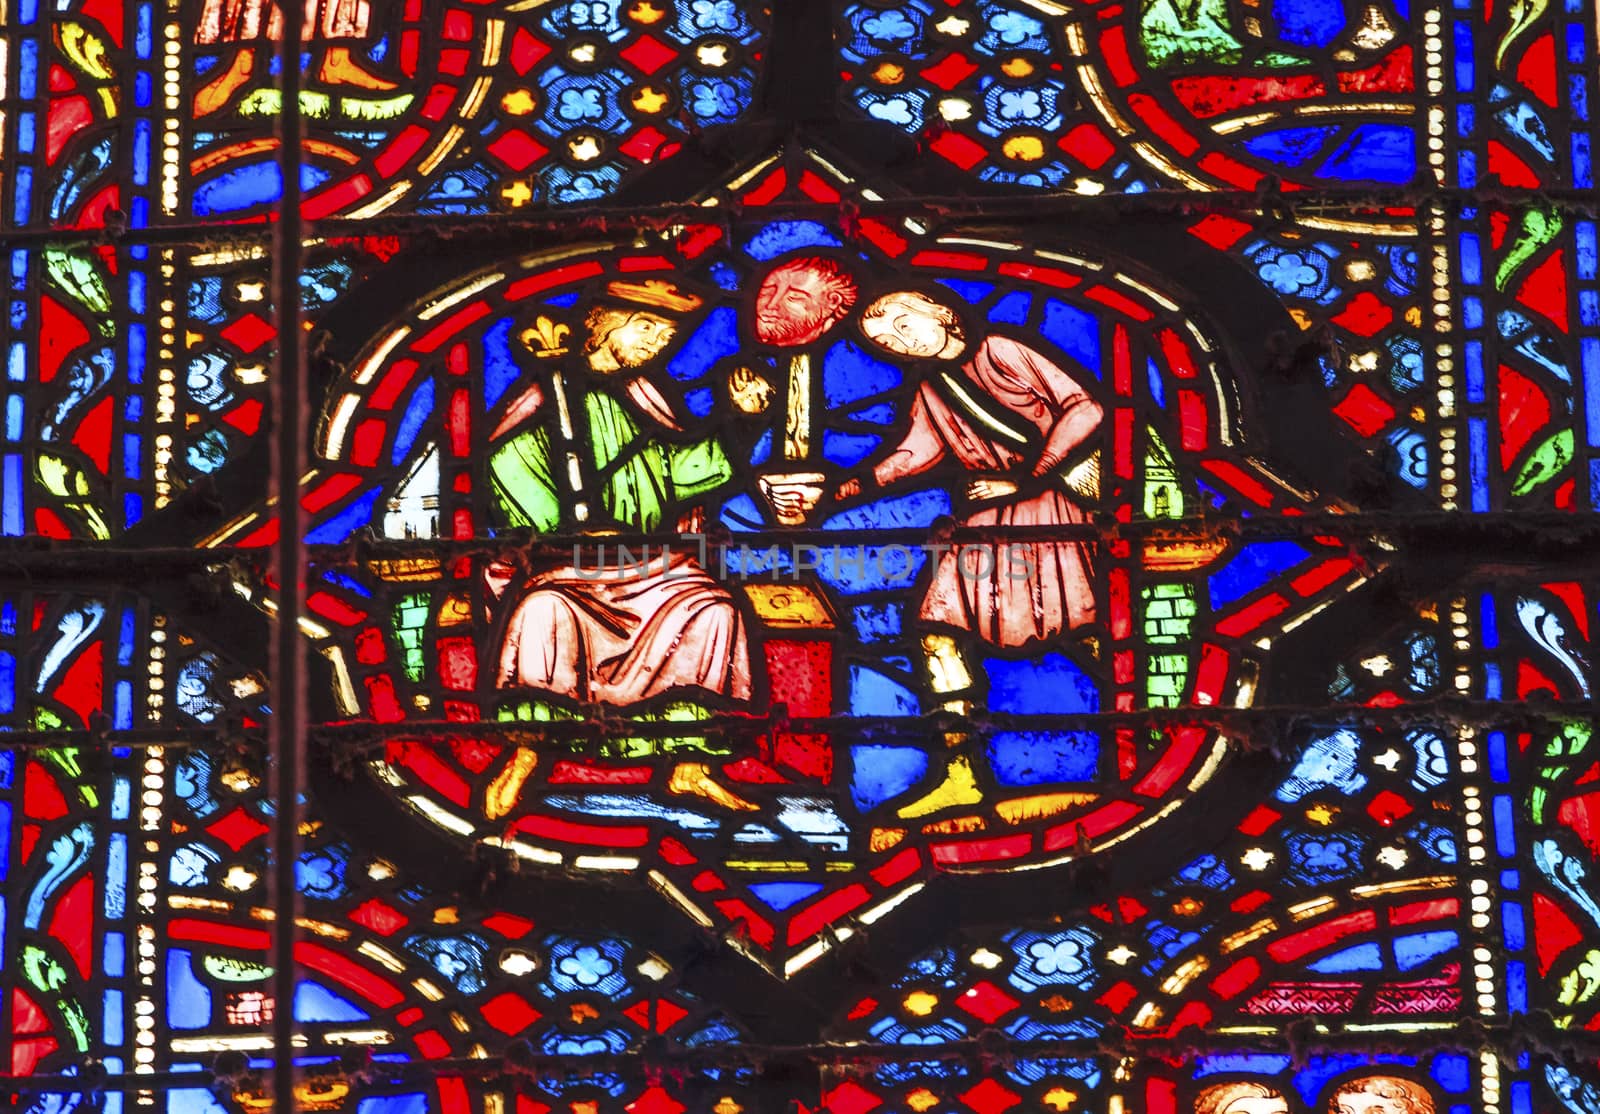 Knight Presenting Head of Enemy to KIng Louis 9th Stained Glass Saint Chapelle Paris France.  Saint King Louis 9th created Sainte Chapelle in 1248 to house Christian relics, including Christ's Crown of Thorns.  Stained Glass created in the 13th Century and shows various biblical stories along with stories from 1200s.